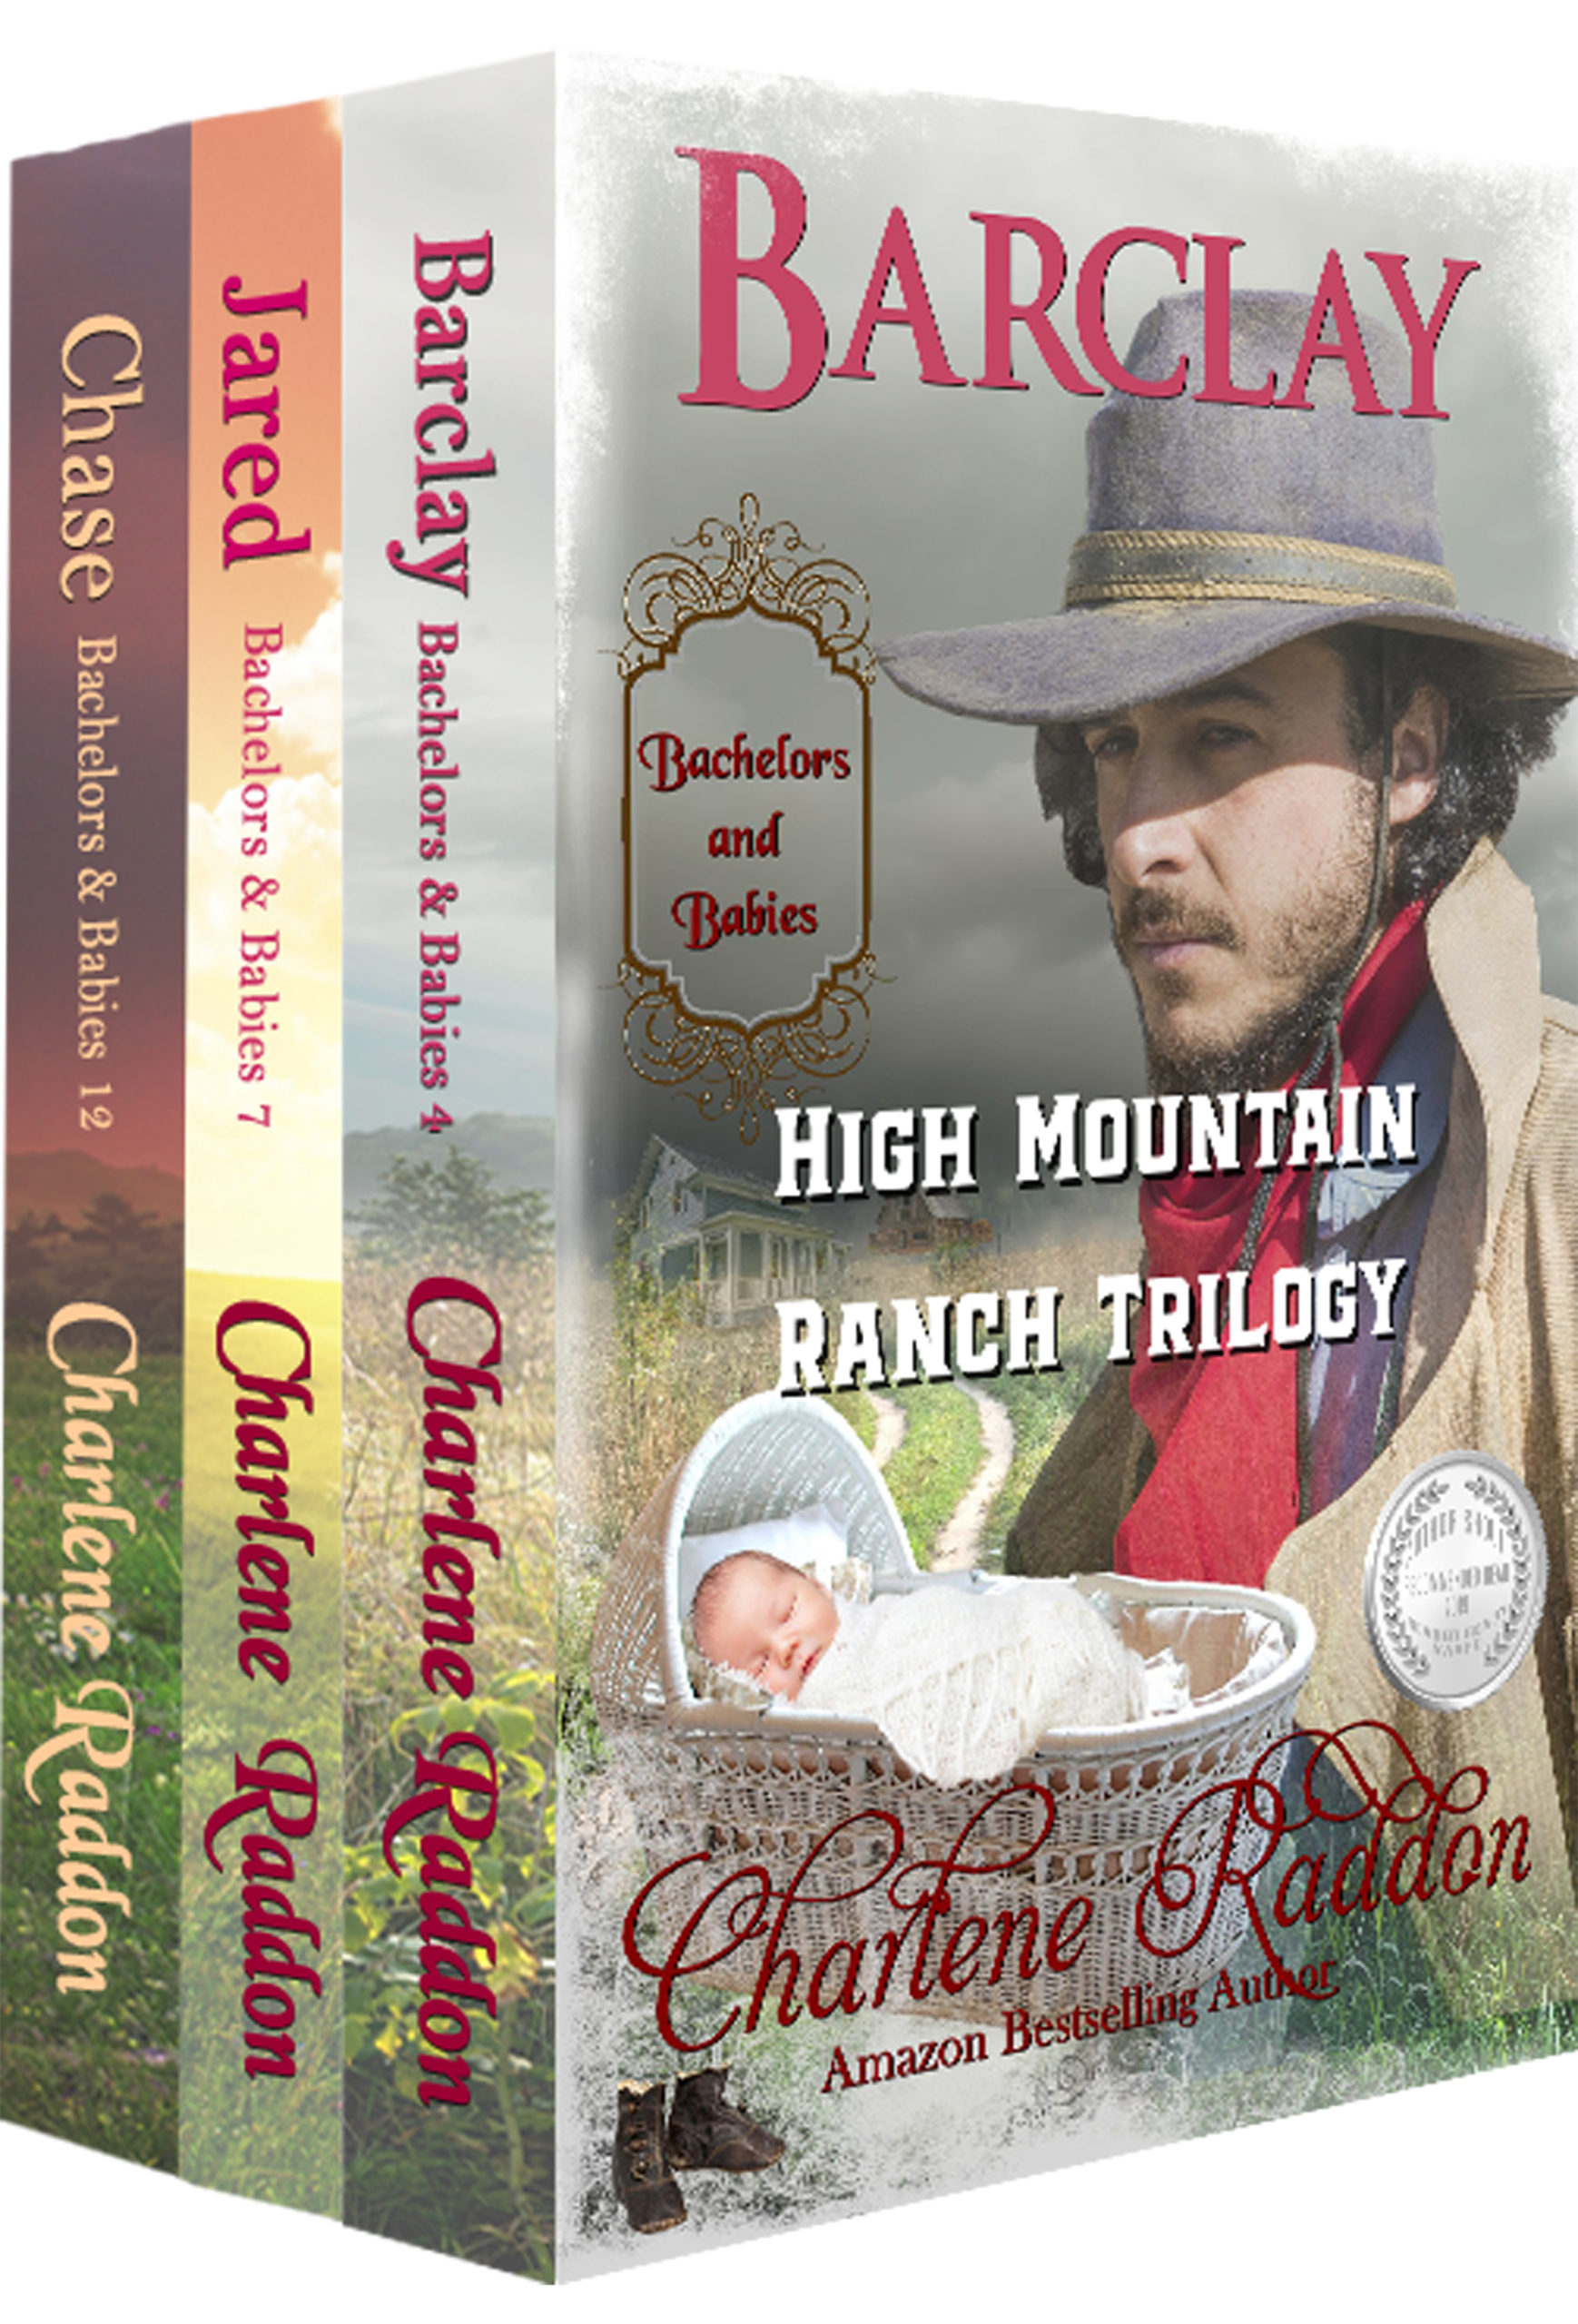 High Mountain Ranch Trilogy: Bachelors & Babies, Barclay, Jared, Chase